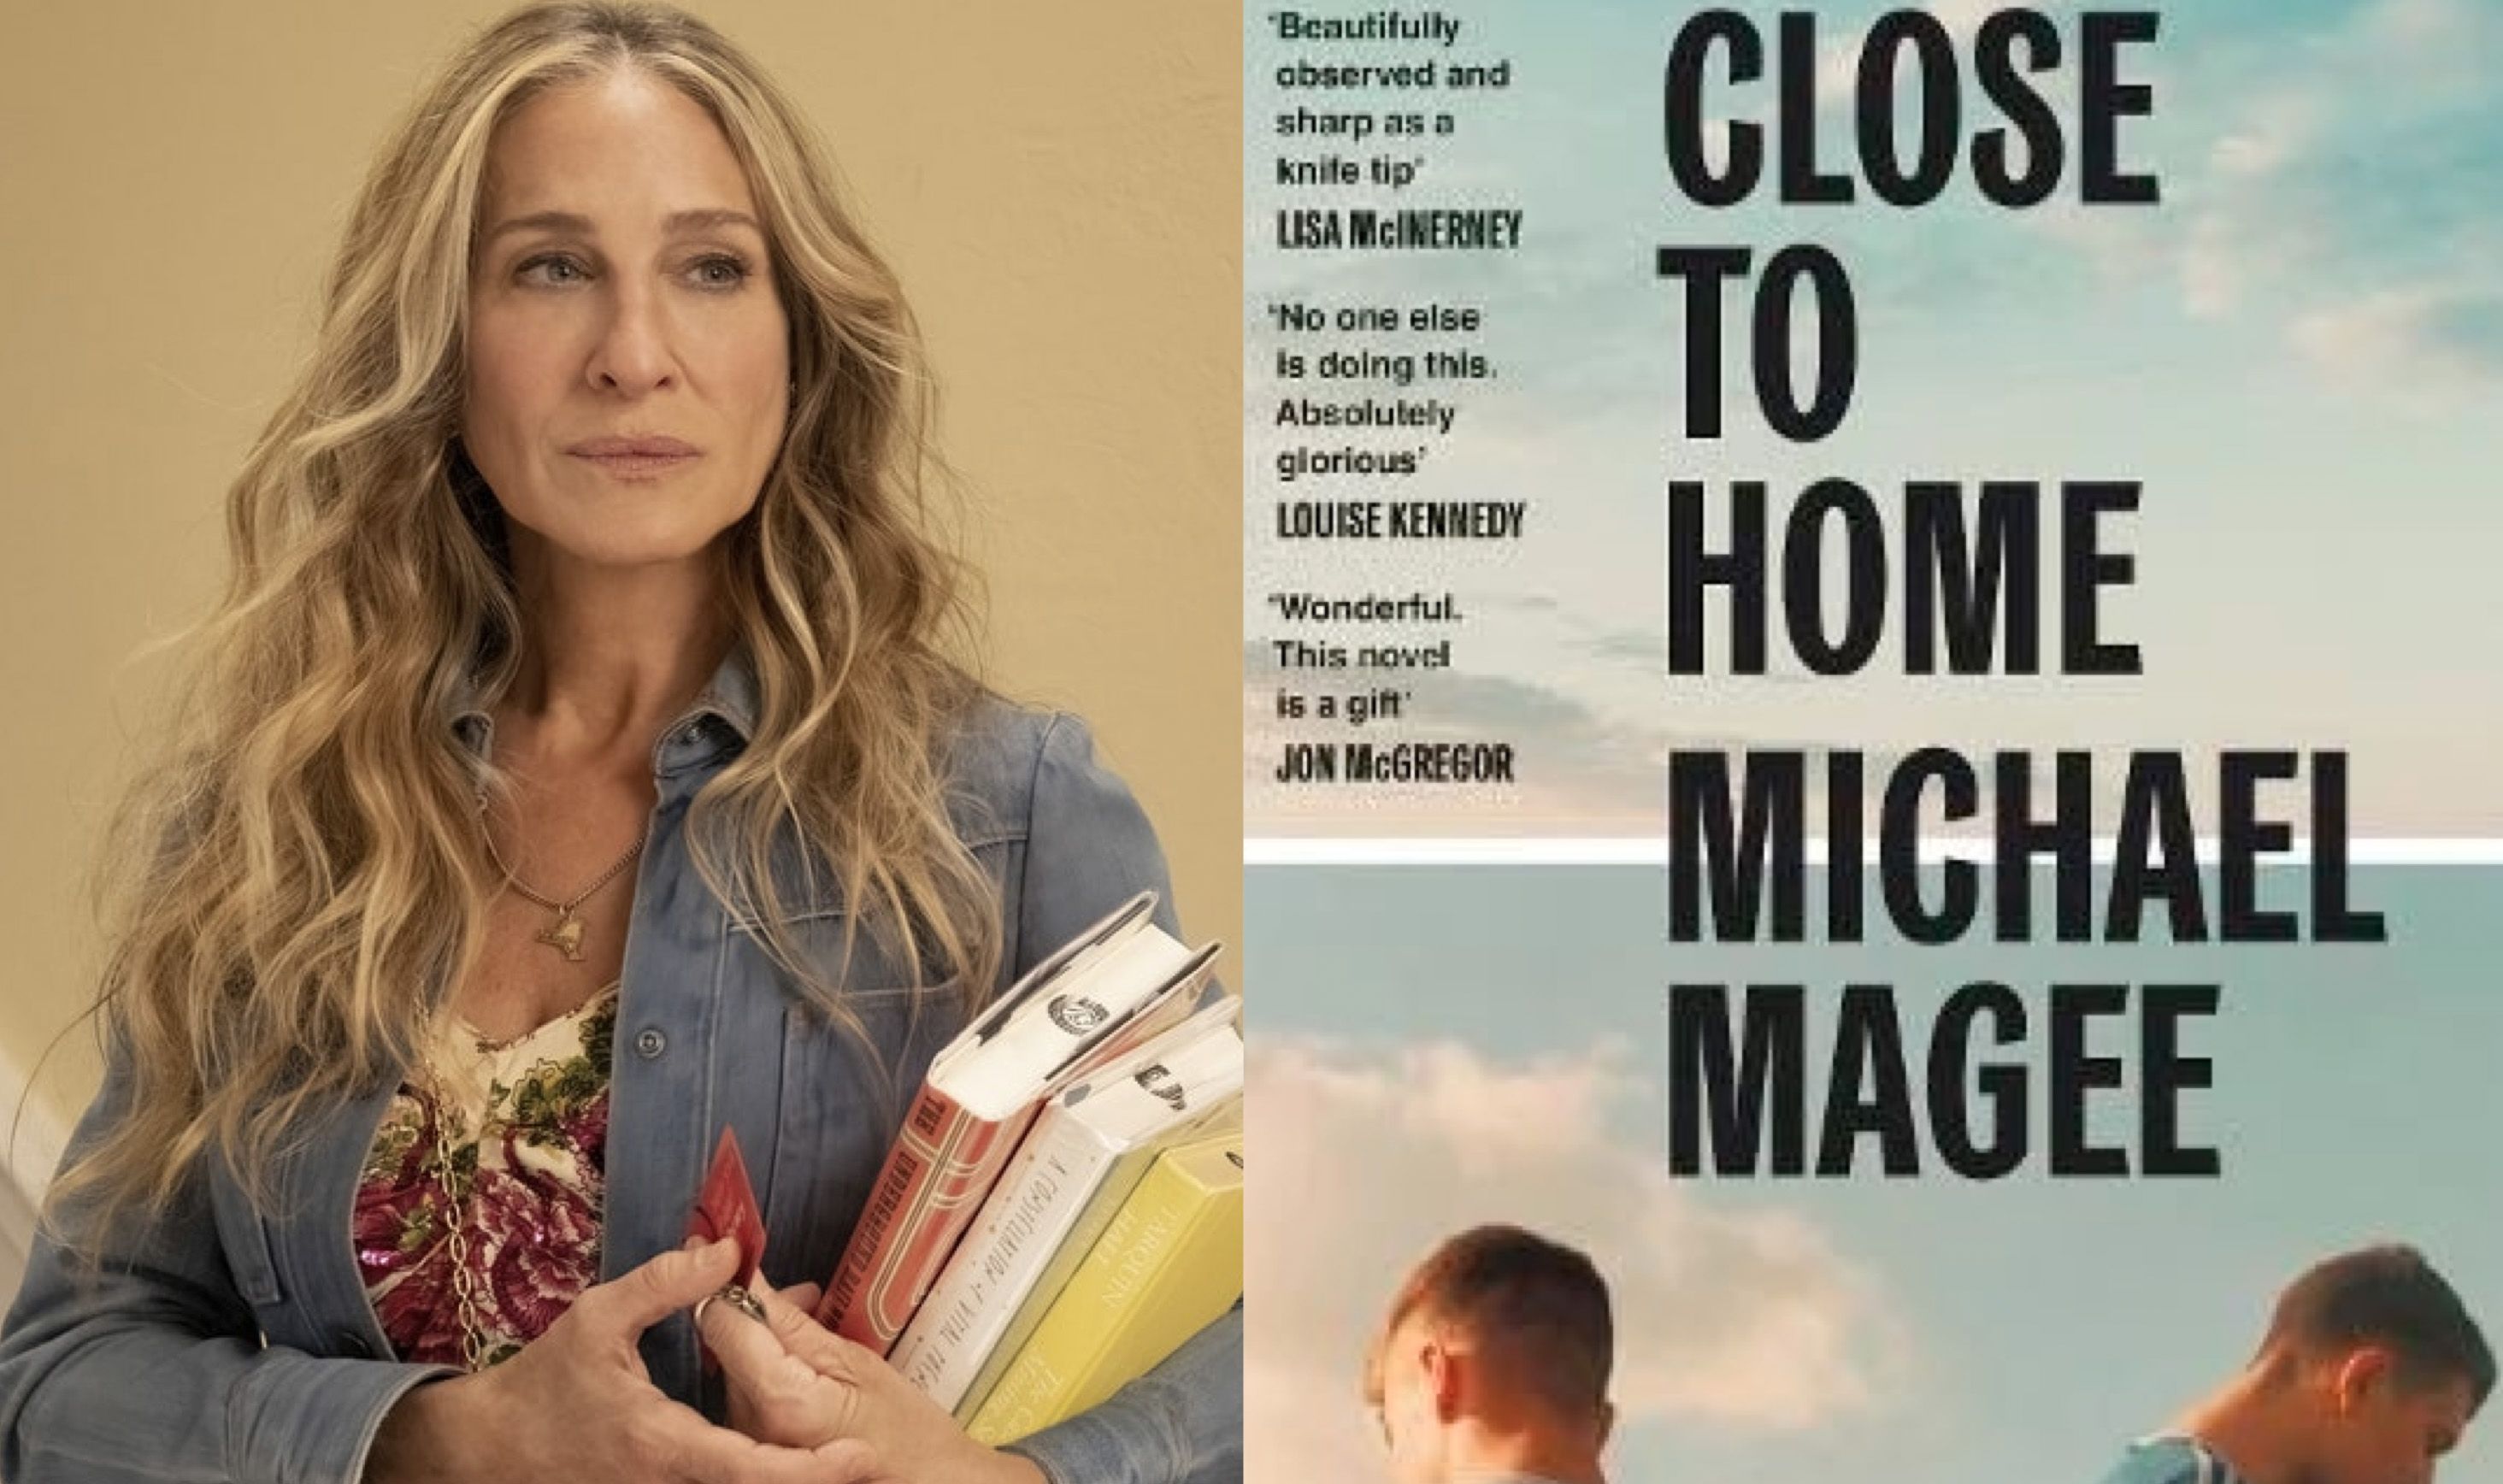 RECOMMENDATION: Sarah Jessica Parker and Close To Home by Michael Magee from Poleglass